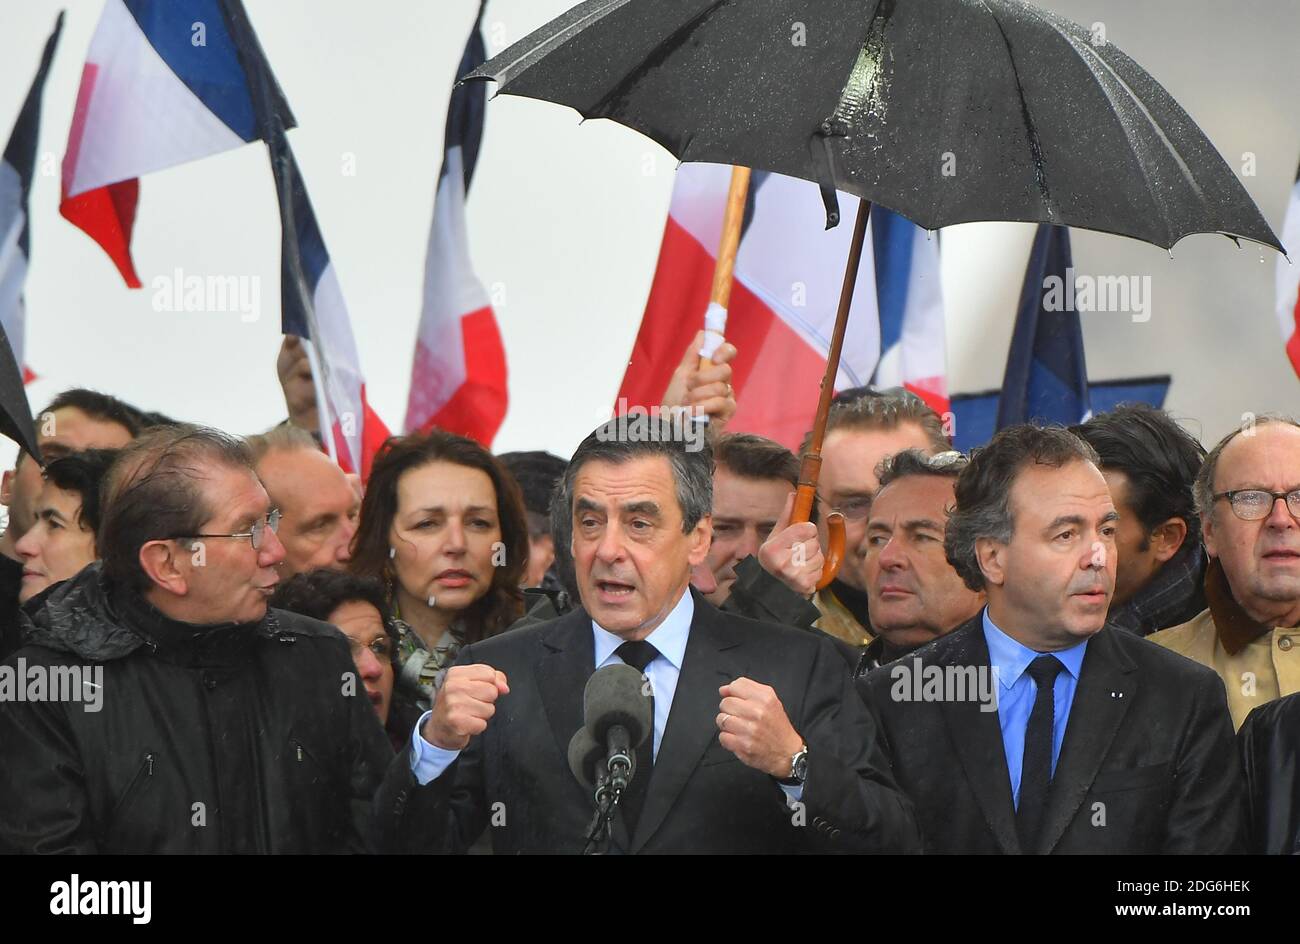 Presidential election candidate for the right-wing Les Republicains (LR) party Francois Fillon speaks during a rally at the Place du Trocadero, in Paris, France, on March 5, 2017. Embattled French conservative Francois Fillon told supporters to never give up the fight as he strivses to stay in the presidential election race amid an expenses scandal. Fillon, who is to be charged over claims he gave his wife and children highly-paid fake parliamentary jobs, told the rain-drenched crowd he had been attacked by everyone in the campaign. Photo by Christian Liewig/ABACAPRESS.COM Stock Photo